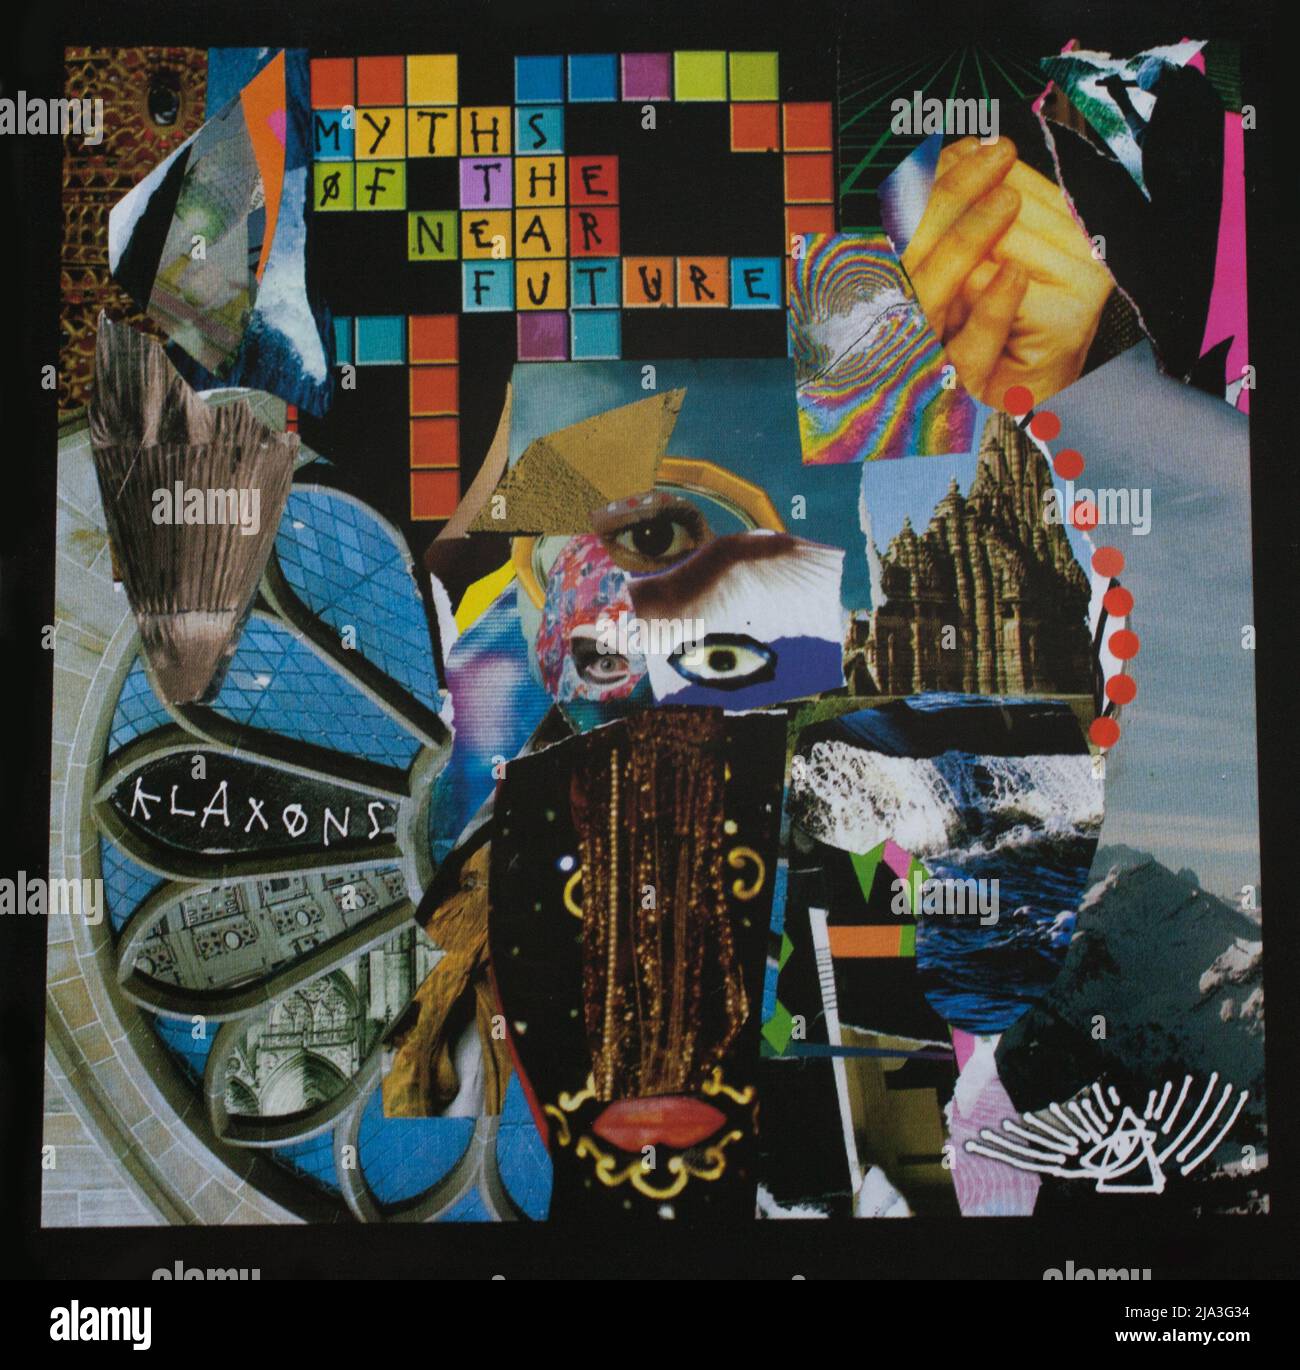 The cd album cover to, Myths of the near future by The Klaxons Stock Photo